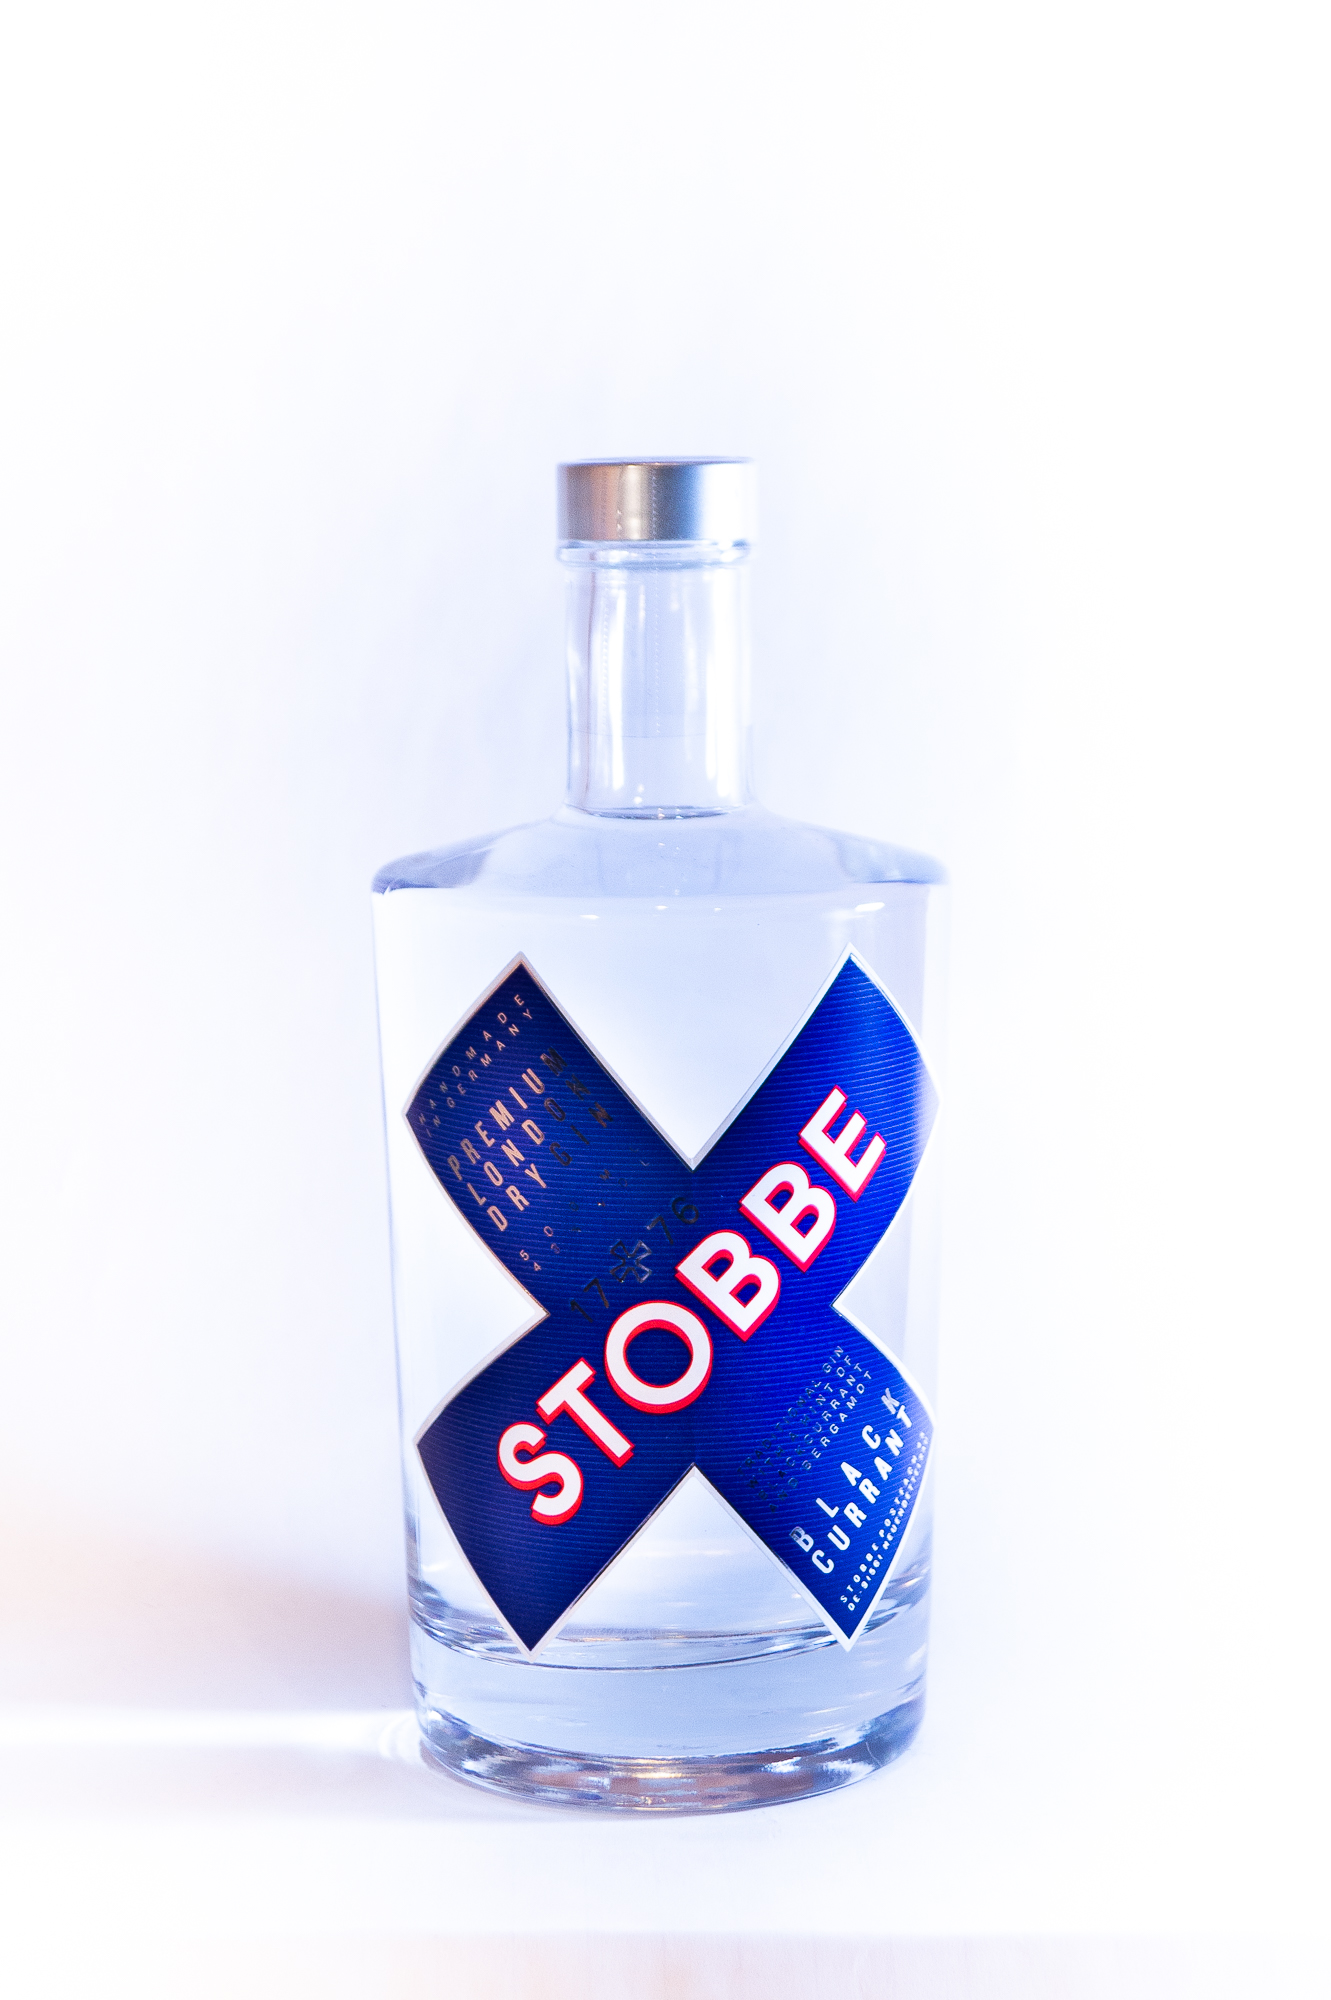 Stobbe 1776 Gin Black Currant